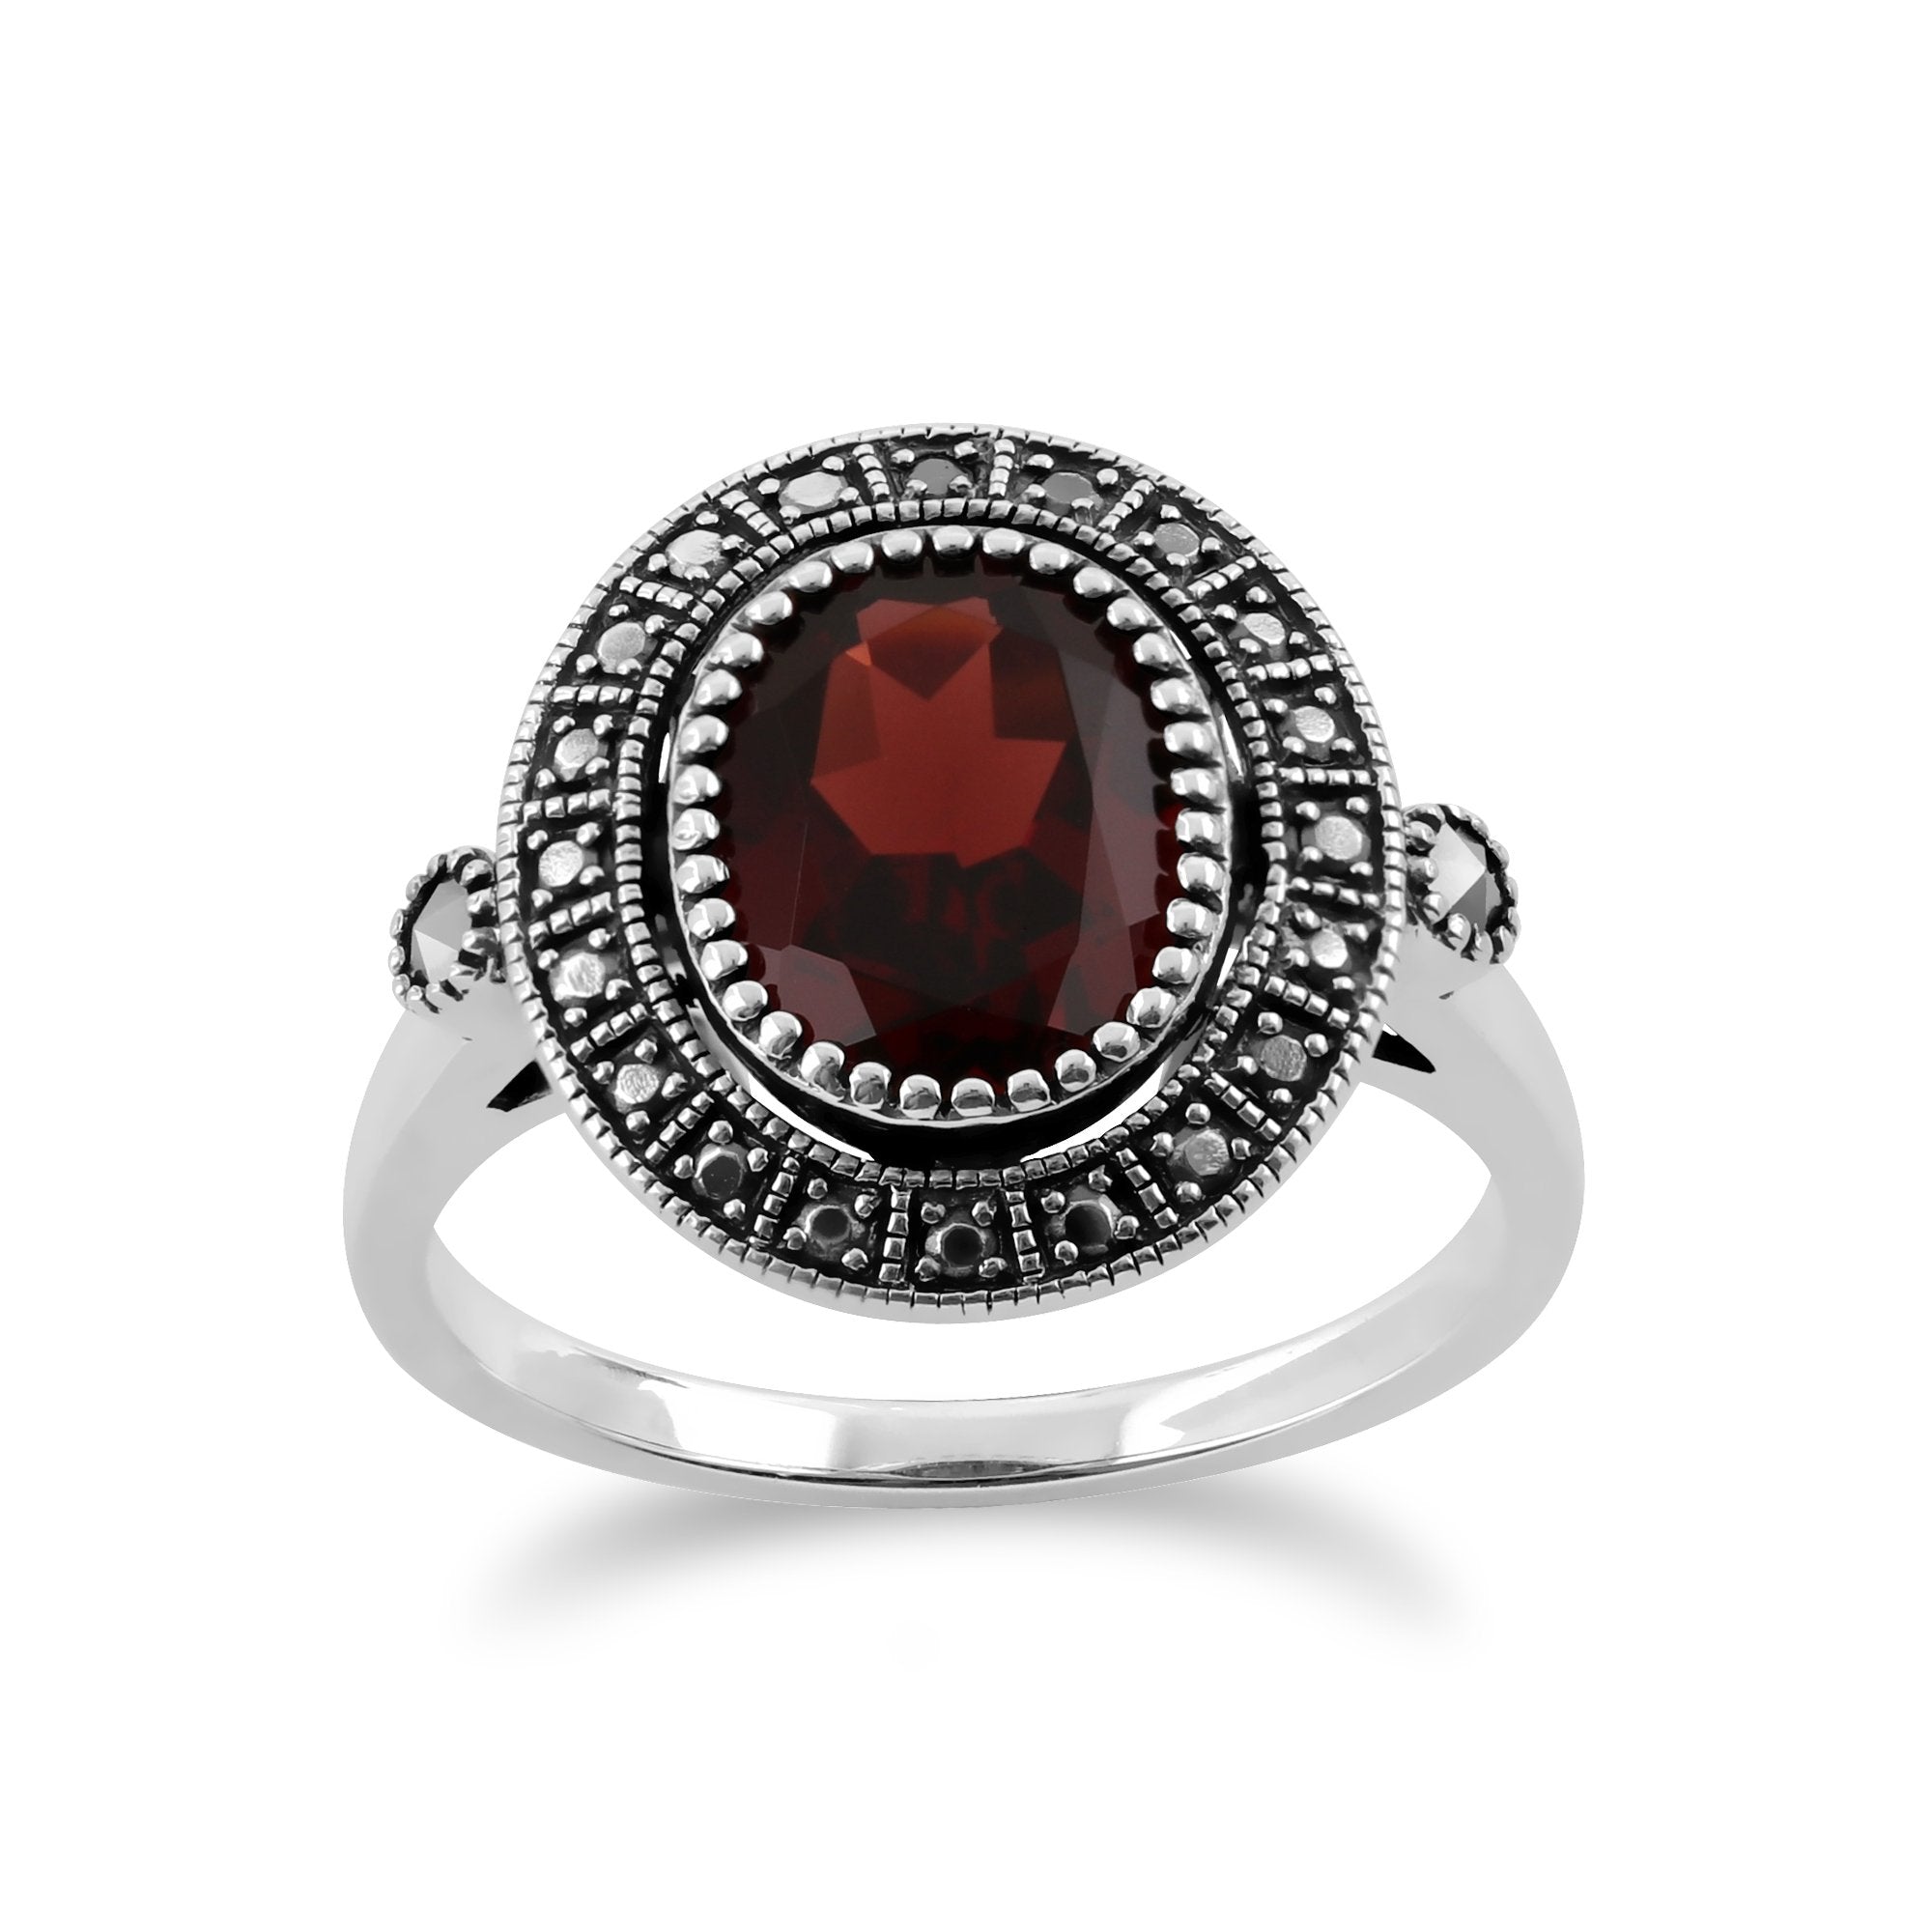 Art Deco Style Oval Garnet & Marcasite Statement Cocktail Ring in 925 Sterling Silver